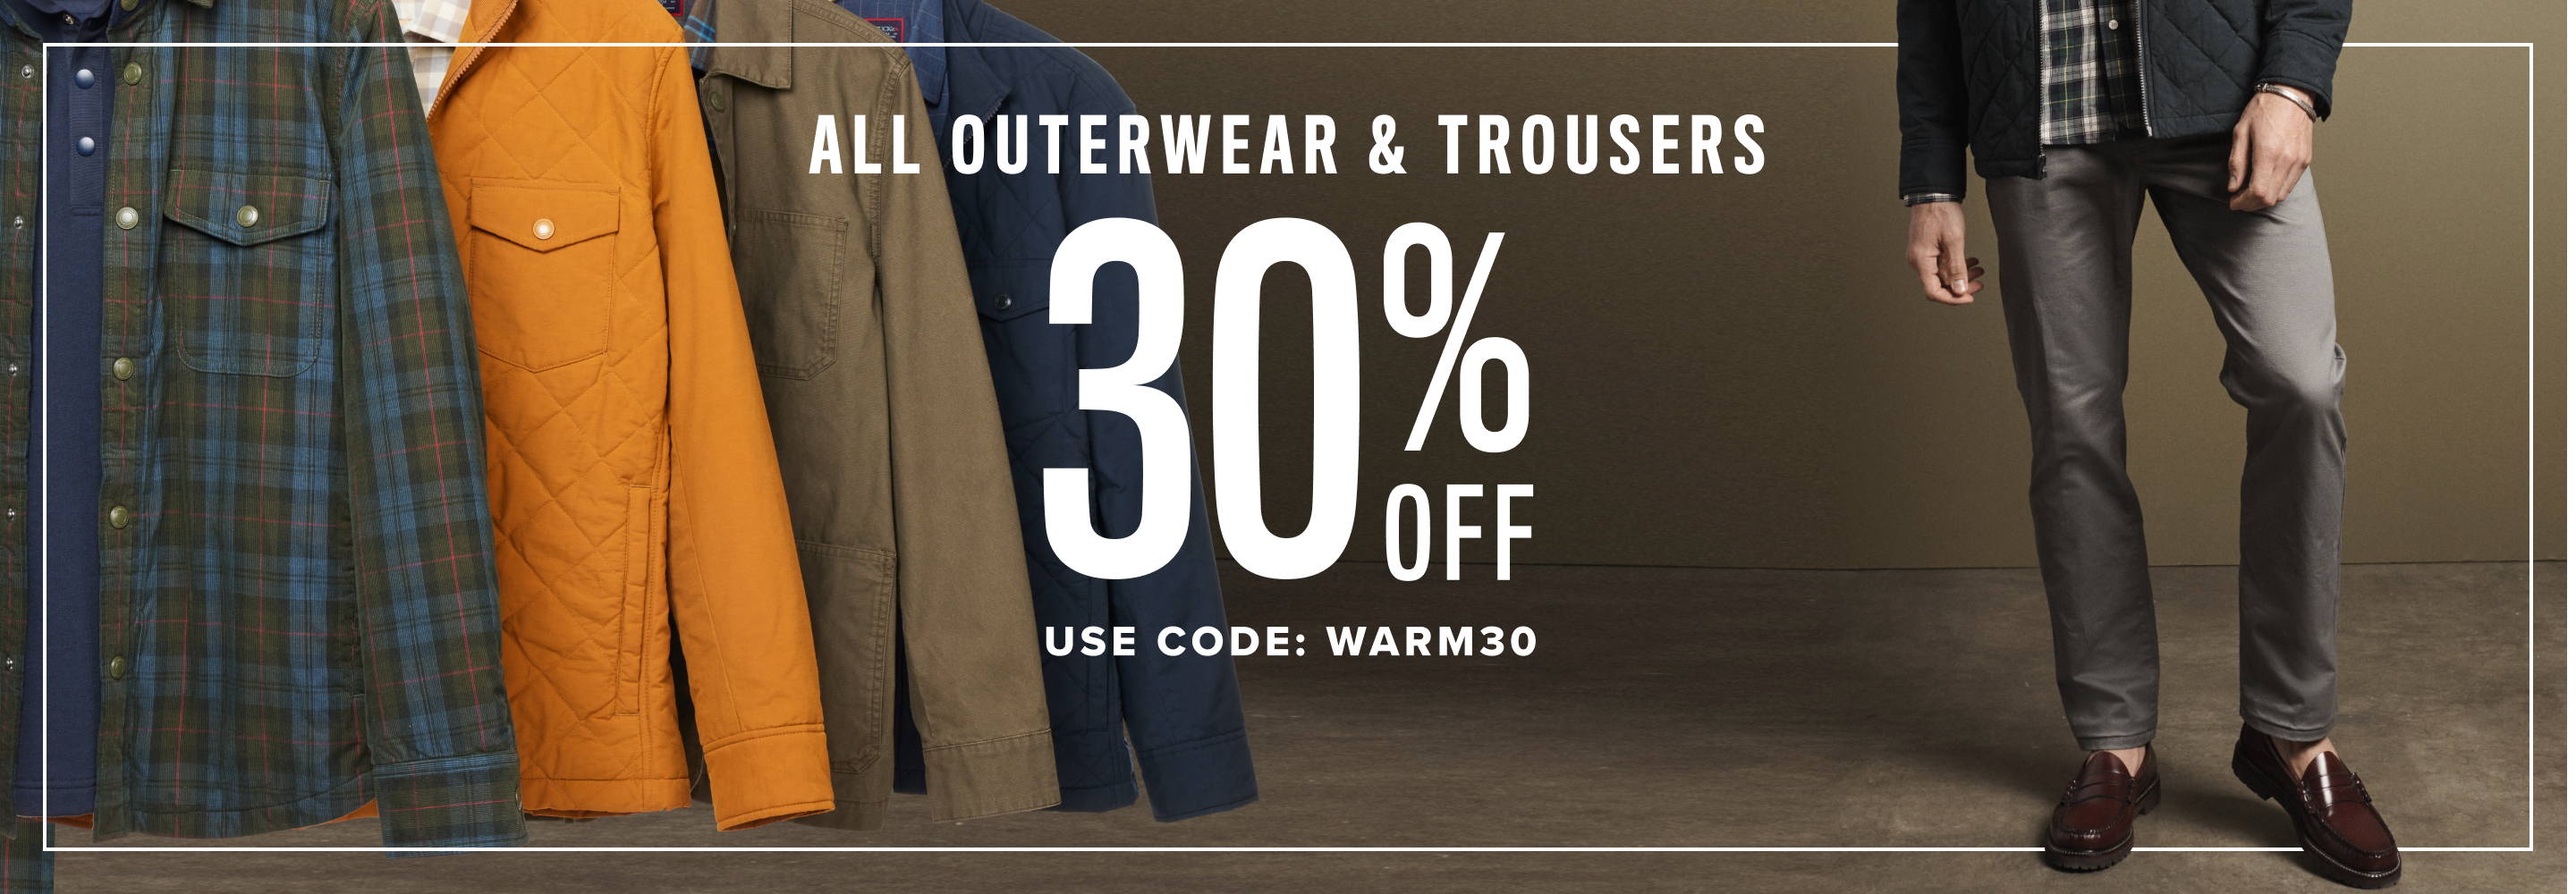 All Outerwear & Trousers 30% Off. Use code: WARM30